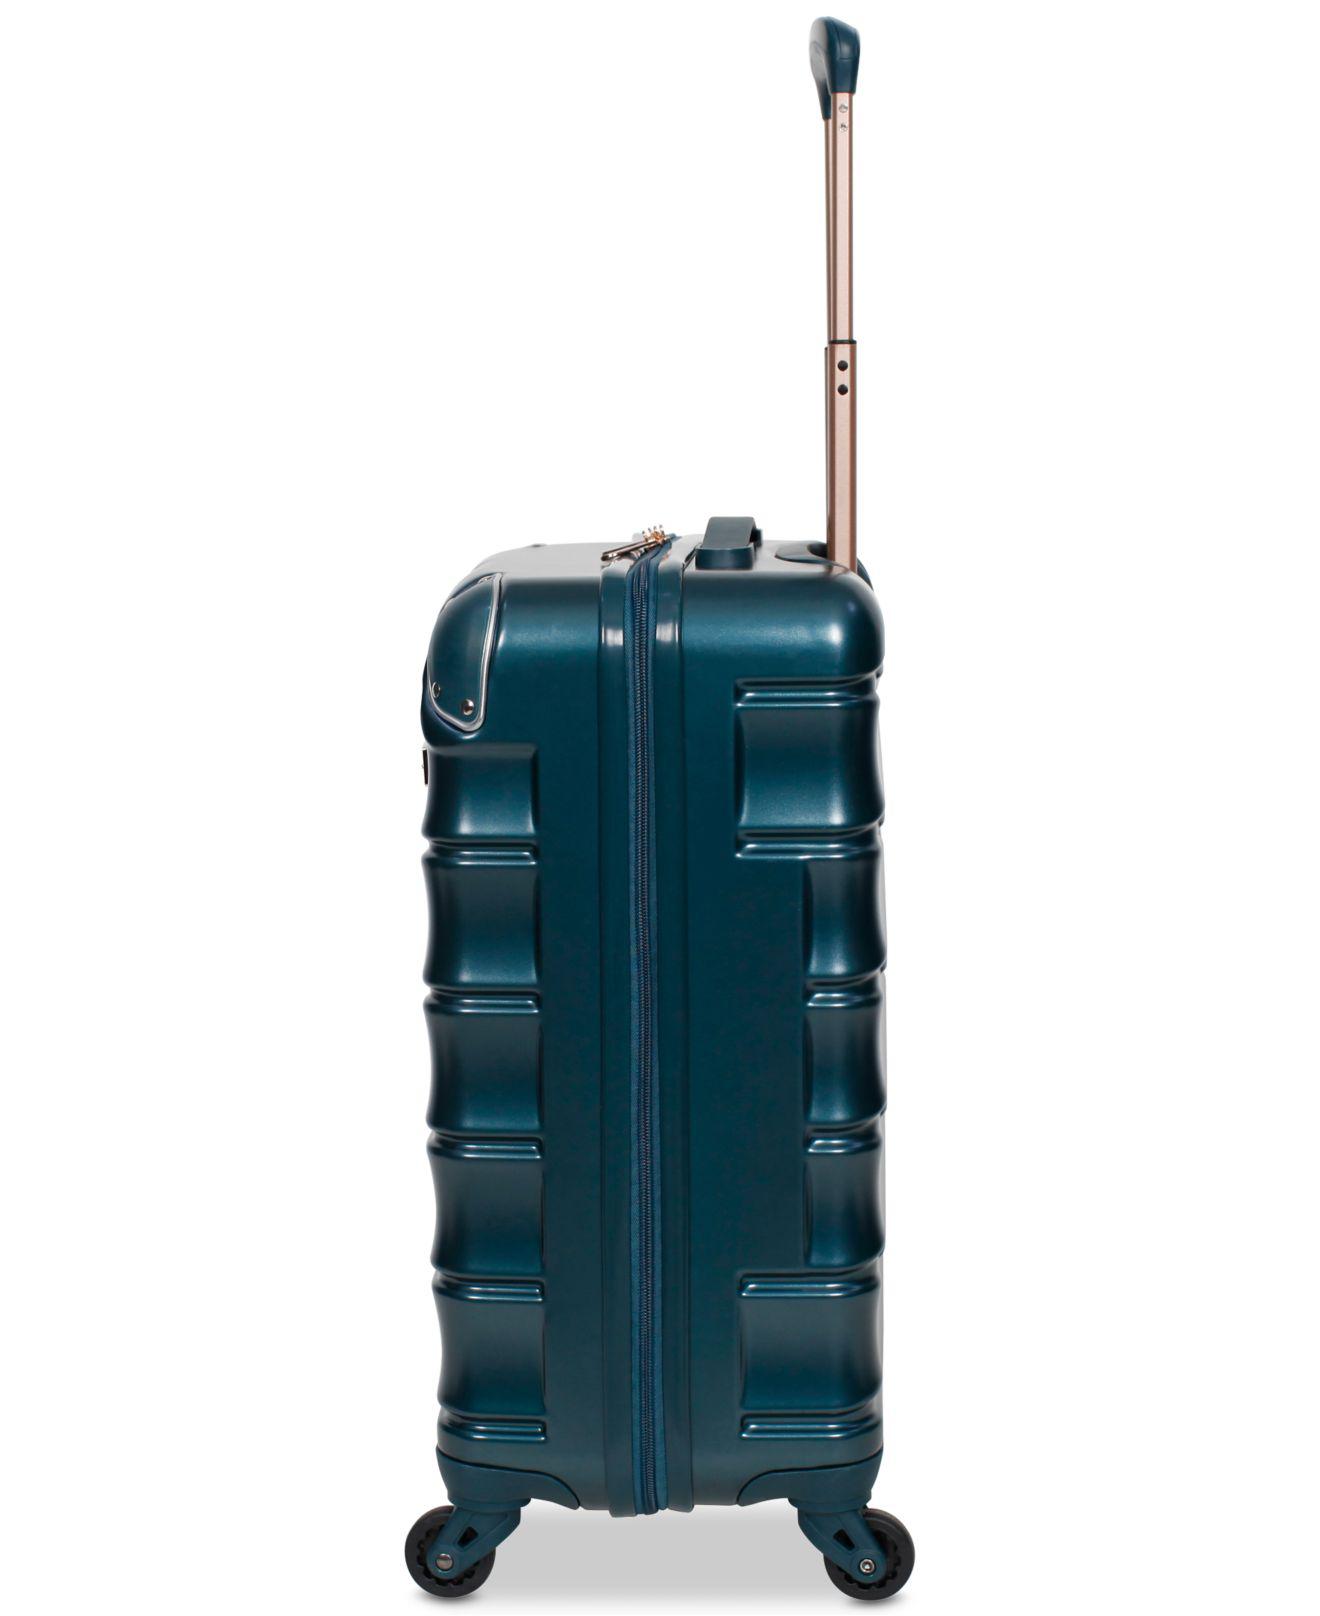 Jessica Simpson Travel Luggage for sale